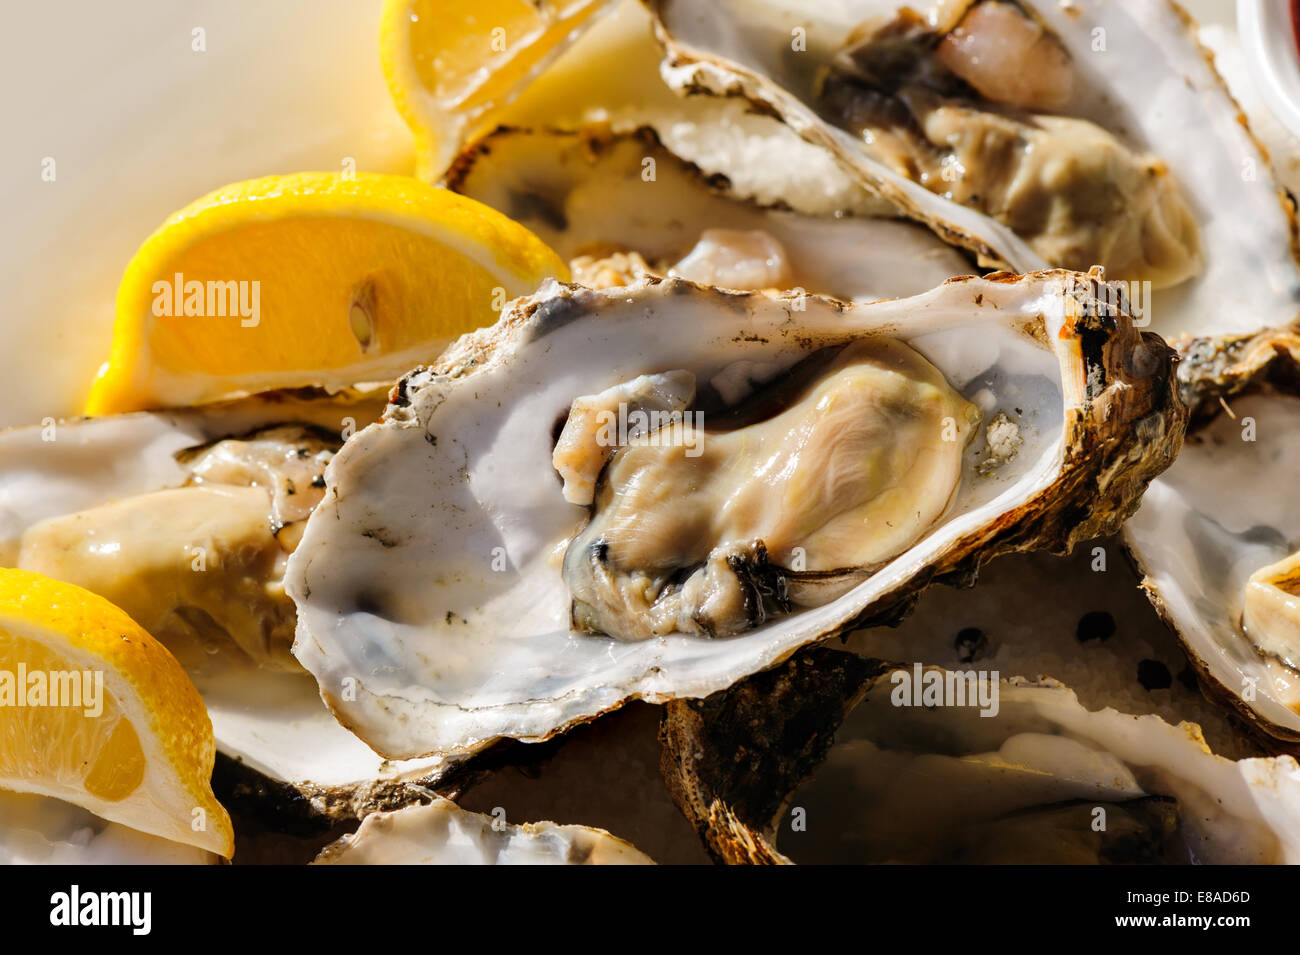 oysters plate Stock Photo